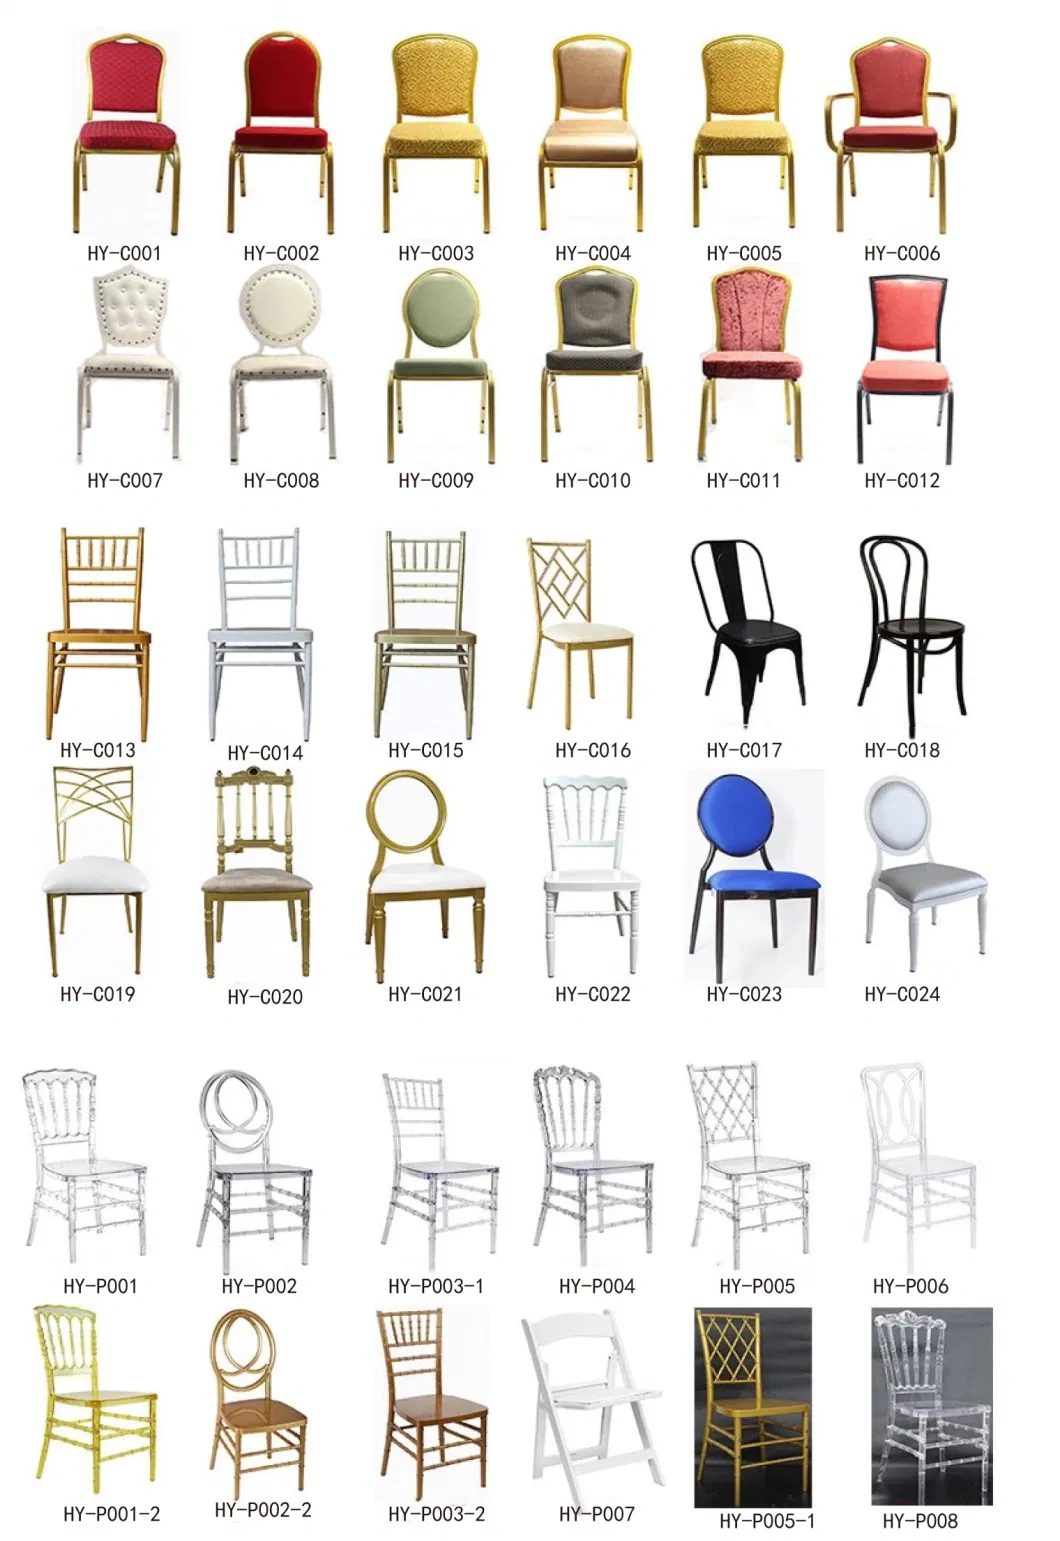 Modern Classic Furniture Styling Chair Back Decoration Leaf Chairs Metal Classic Banquet Chairs for Wedding Events Dining Chair Made in China